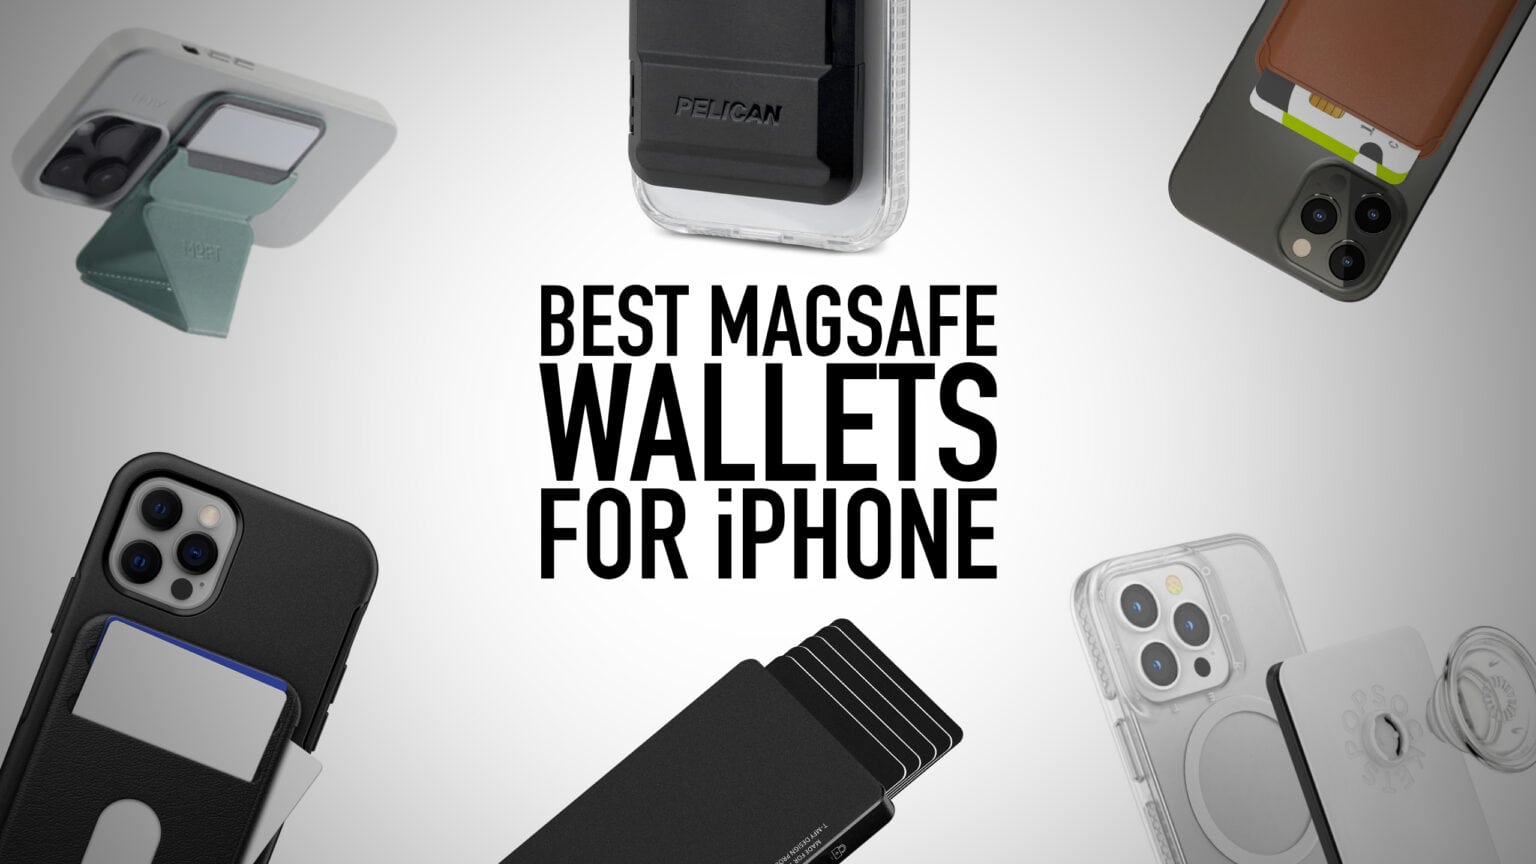 These are the best MagSafe wallets you can buy for iPhone.